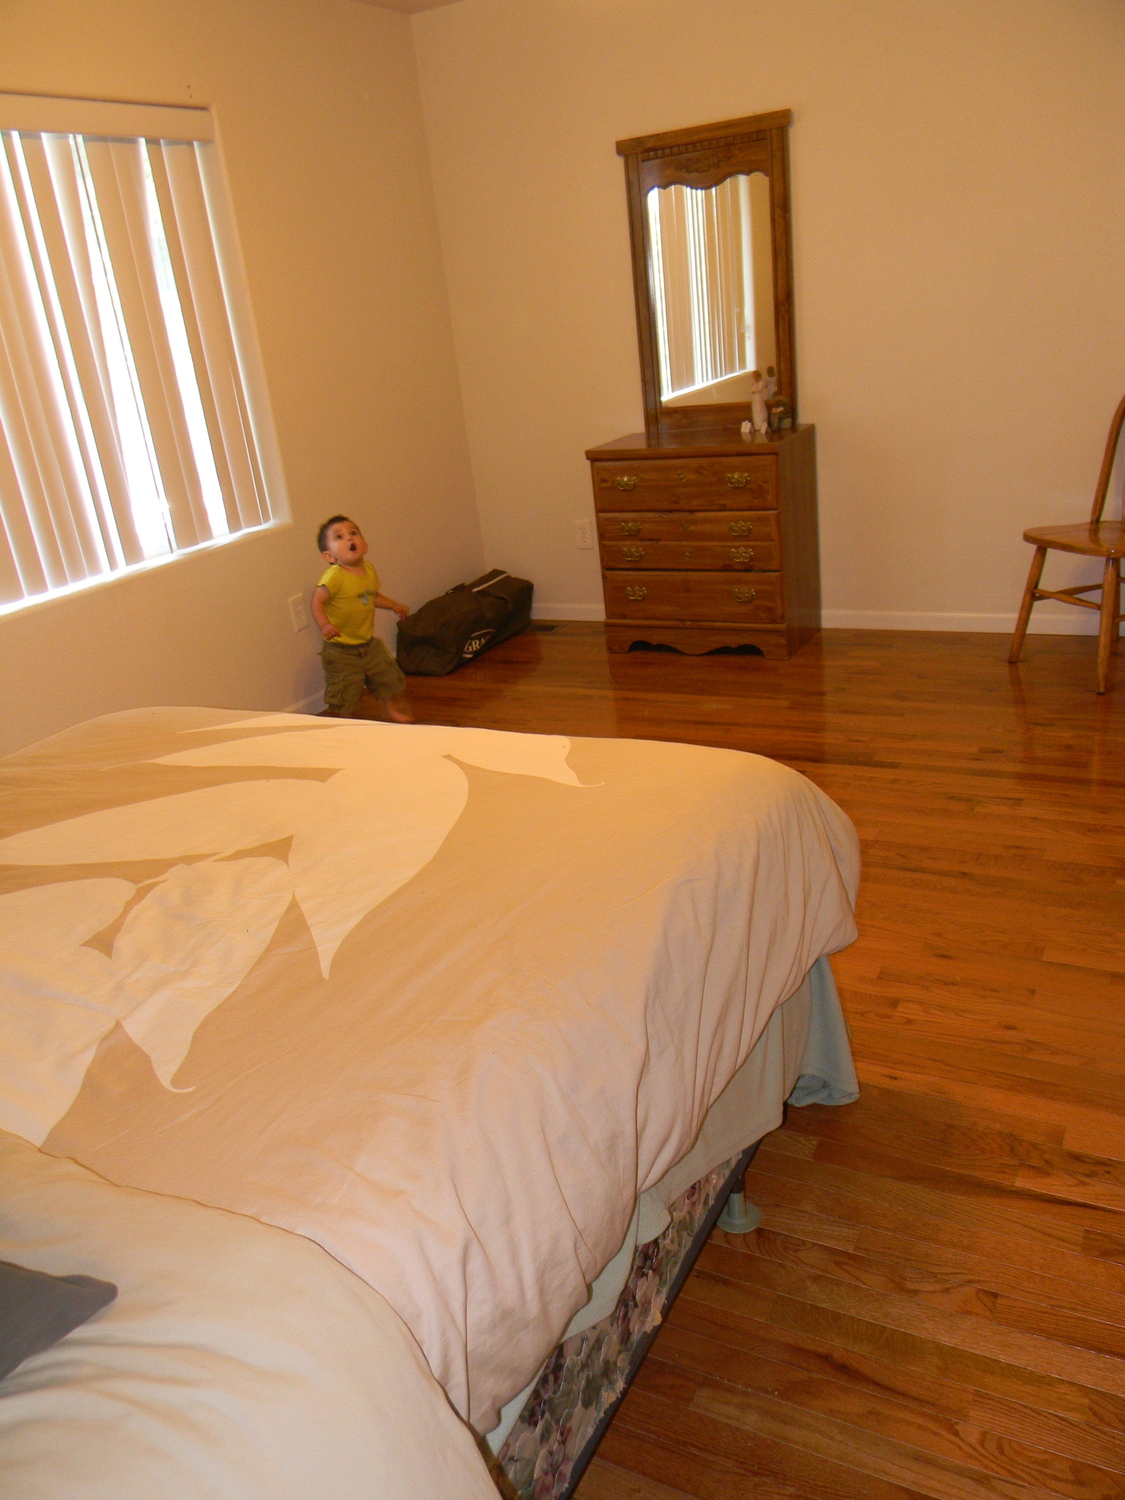 Our bedroom (with Judah staring at the ceiling fan)